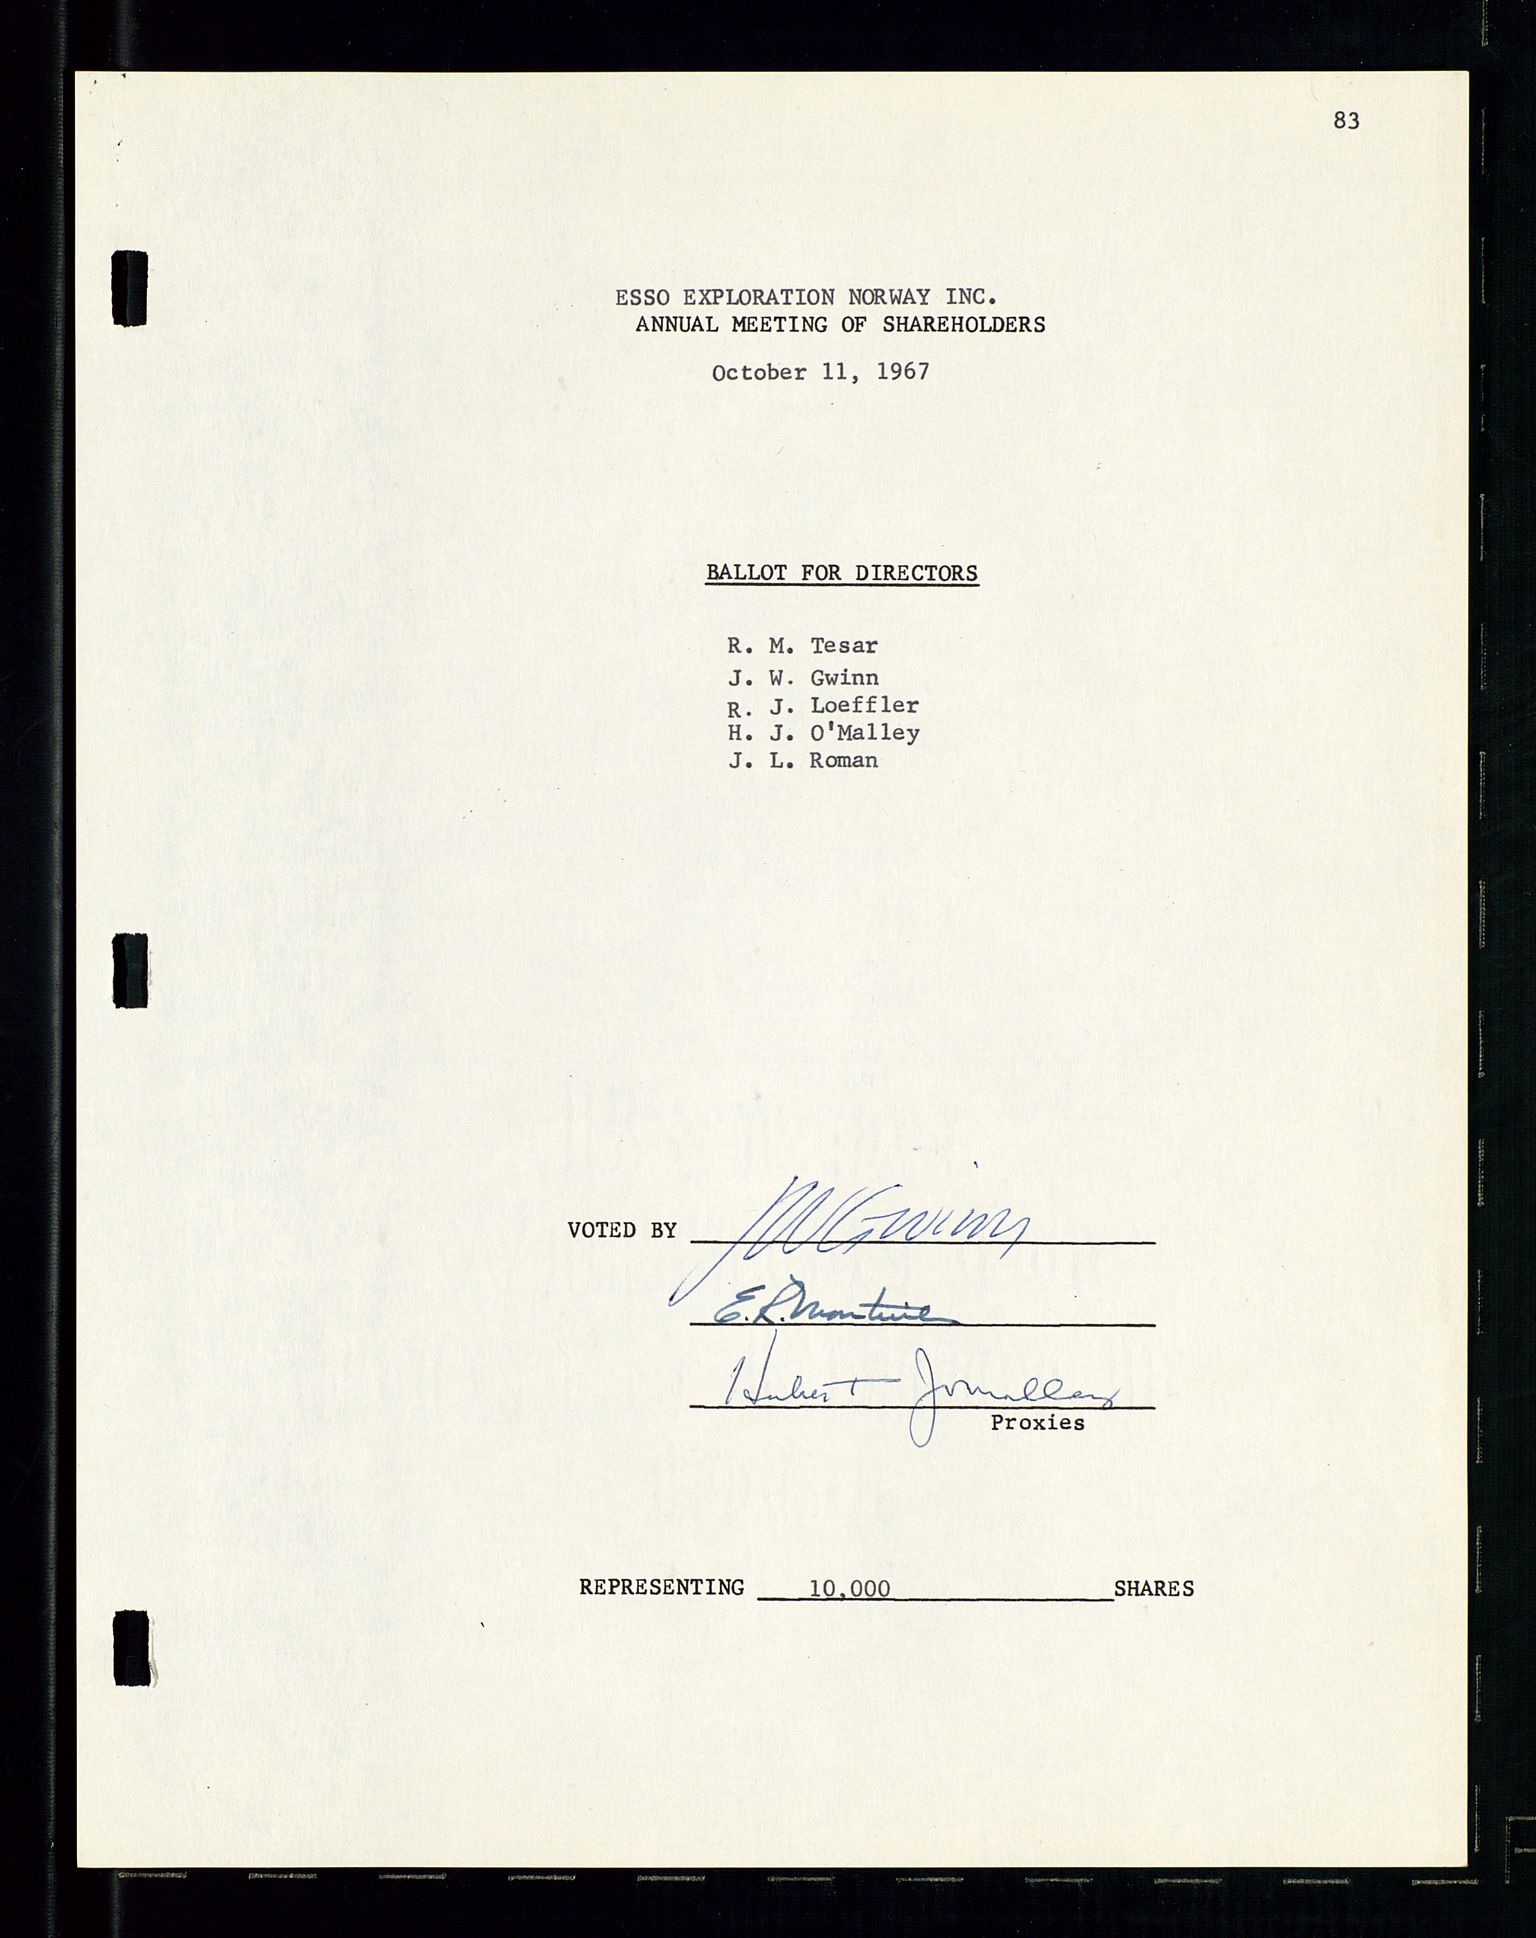 Pa 1512 - Esso Exploration and Production Norway Inc., SAST/A-101917/A/Aa/L0001/0001: Styredokumenter / Corporate records, By-Laws, Board meeting minutes, Incorporations, 1965-1975, s. 83